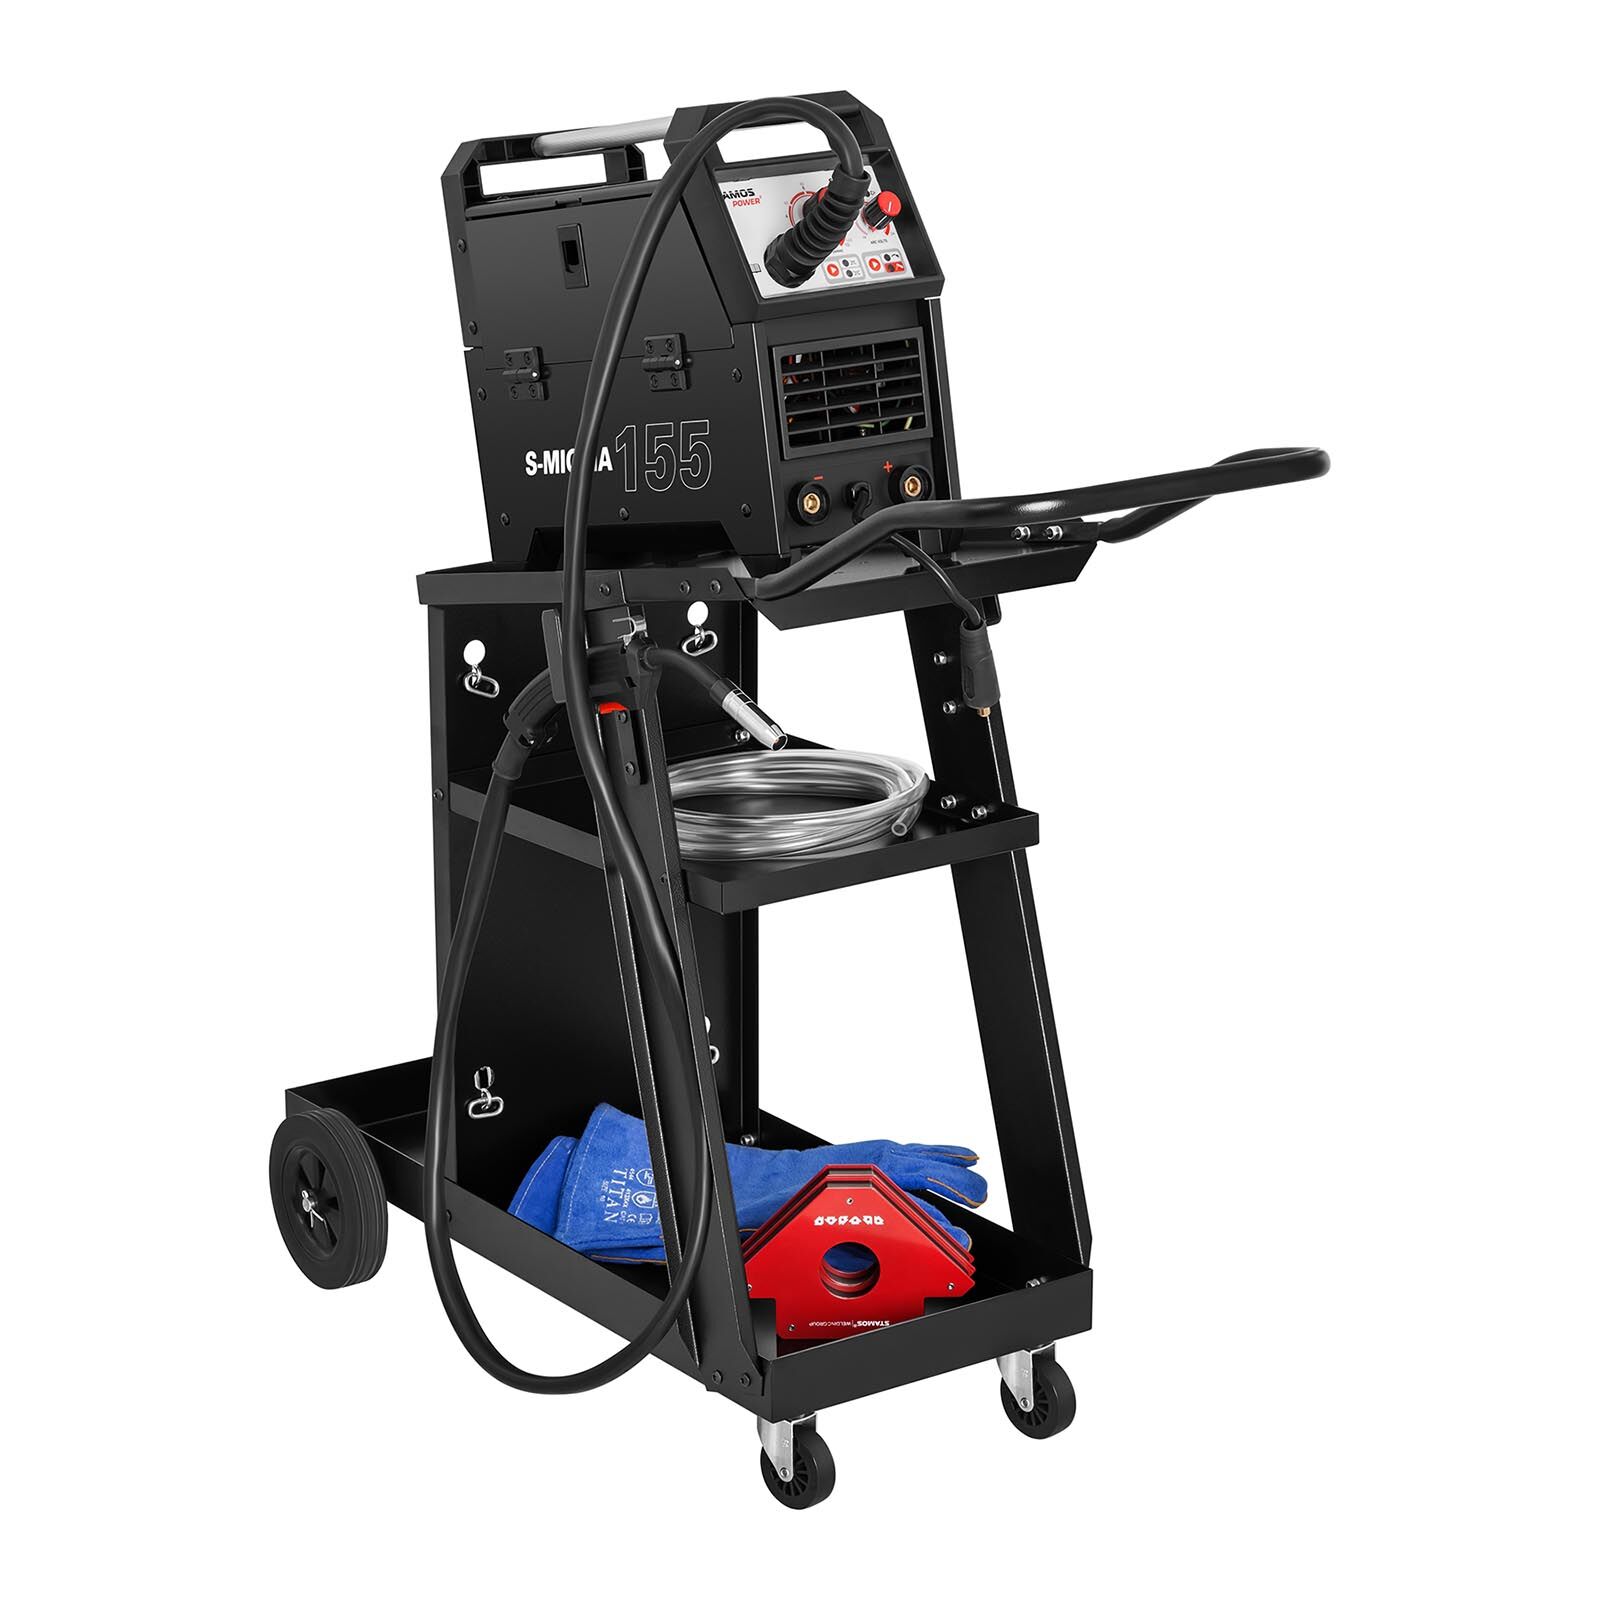 Stamos Welding Group Welding Cart - Angled - 3 Compartments - 75 kg SWG-WC-2